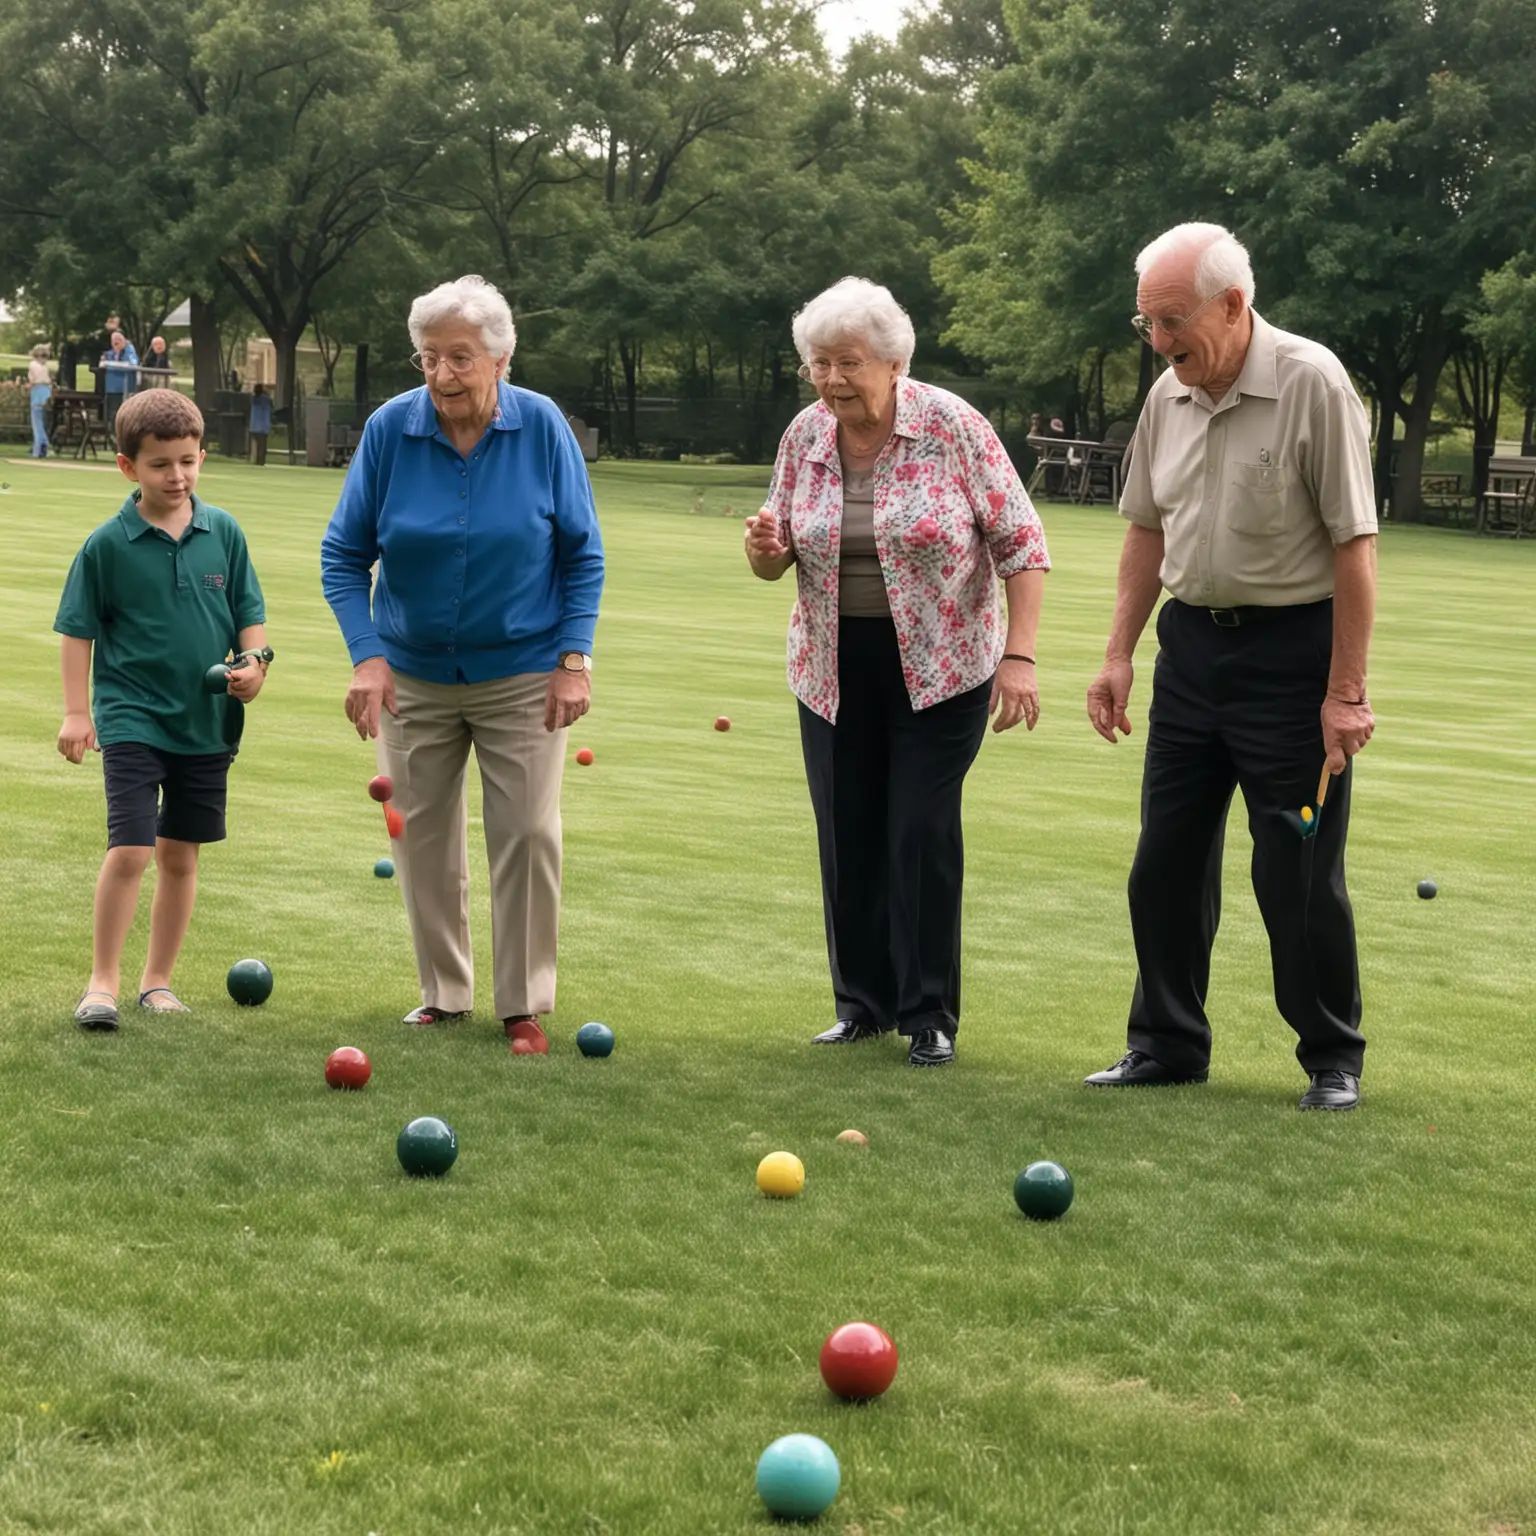 Grandpa and grandma playing Bocce with the children